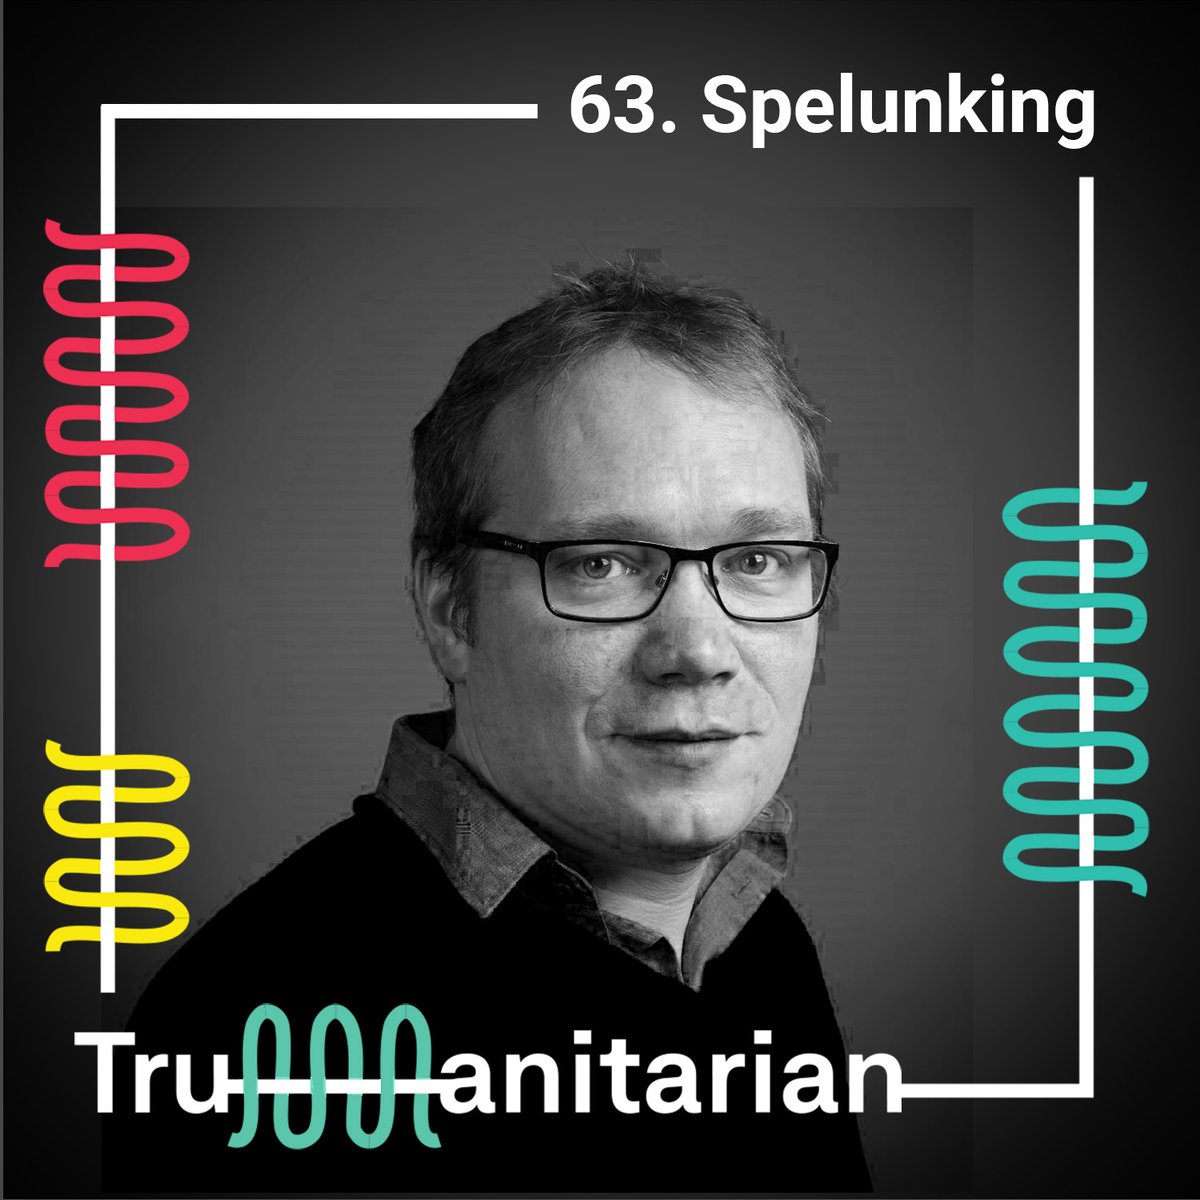 Go #spelunking with @Raphgpro and @lpnissen and learn what has changed and what remains the same in the #humanitarian sector. Listen here: trumanitarian.org/episodes/63-sp…